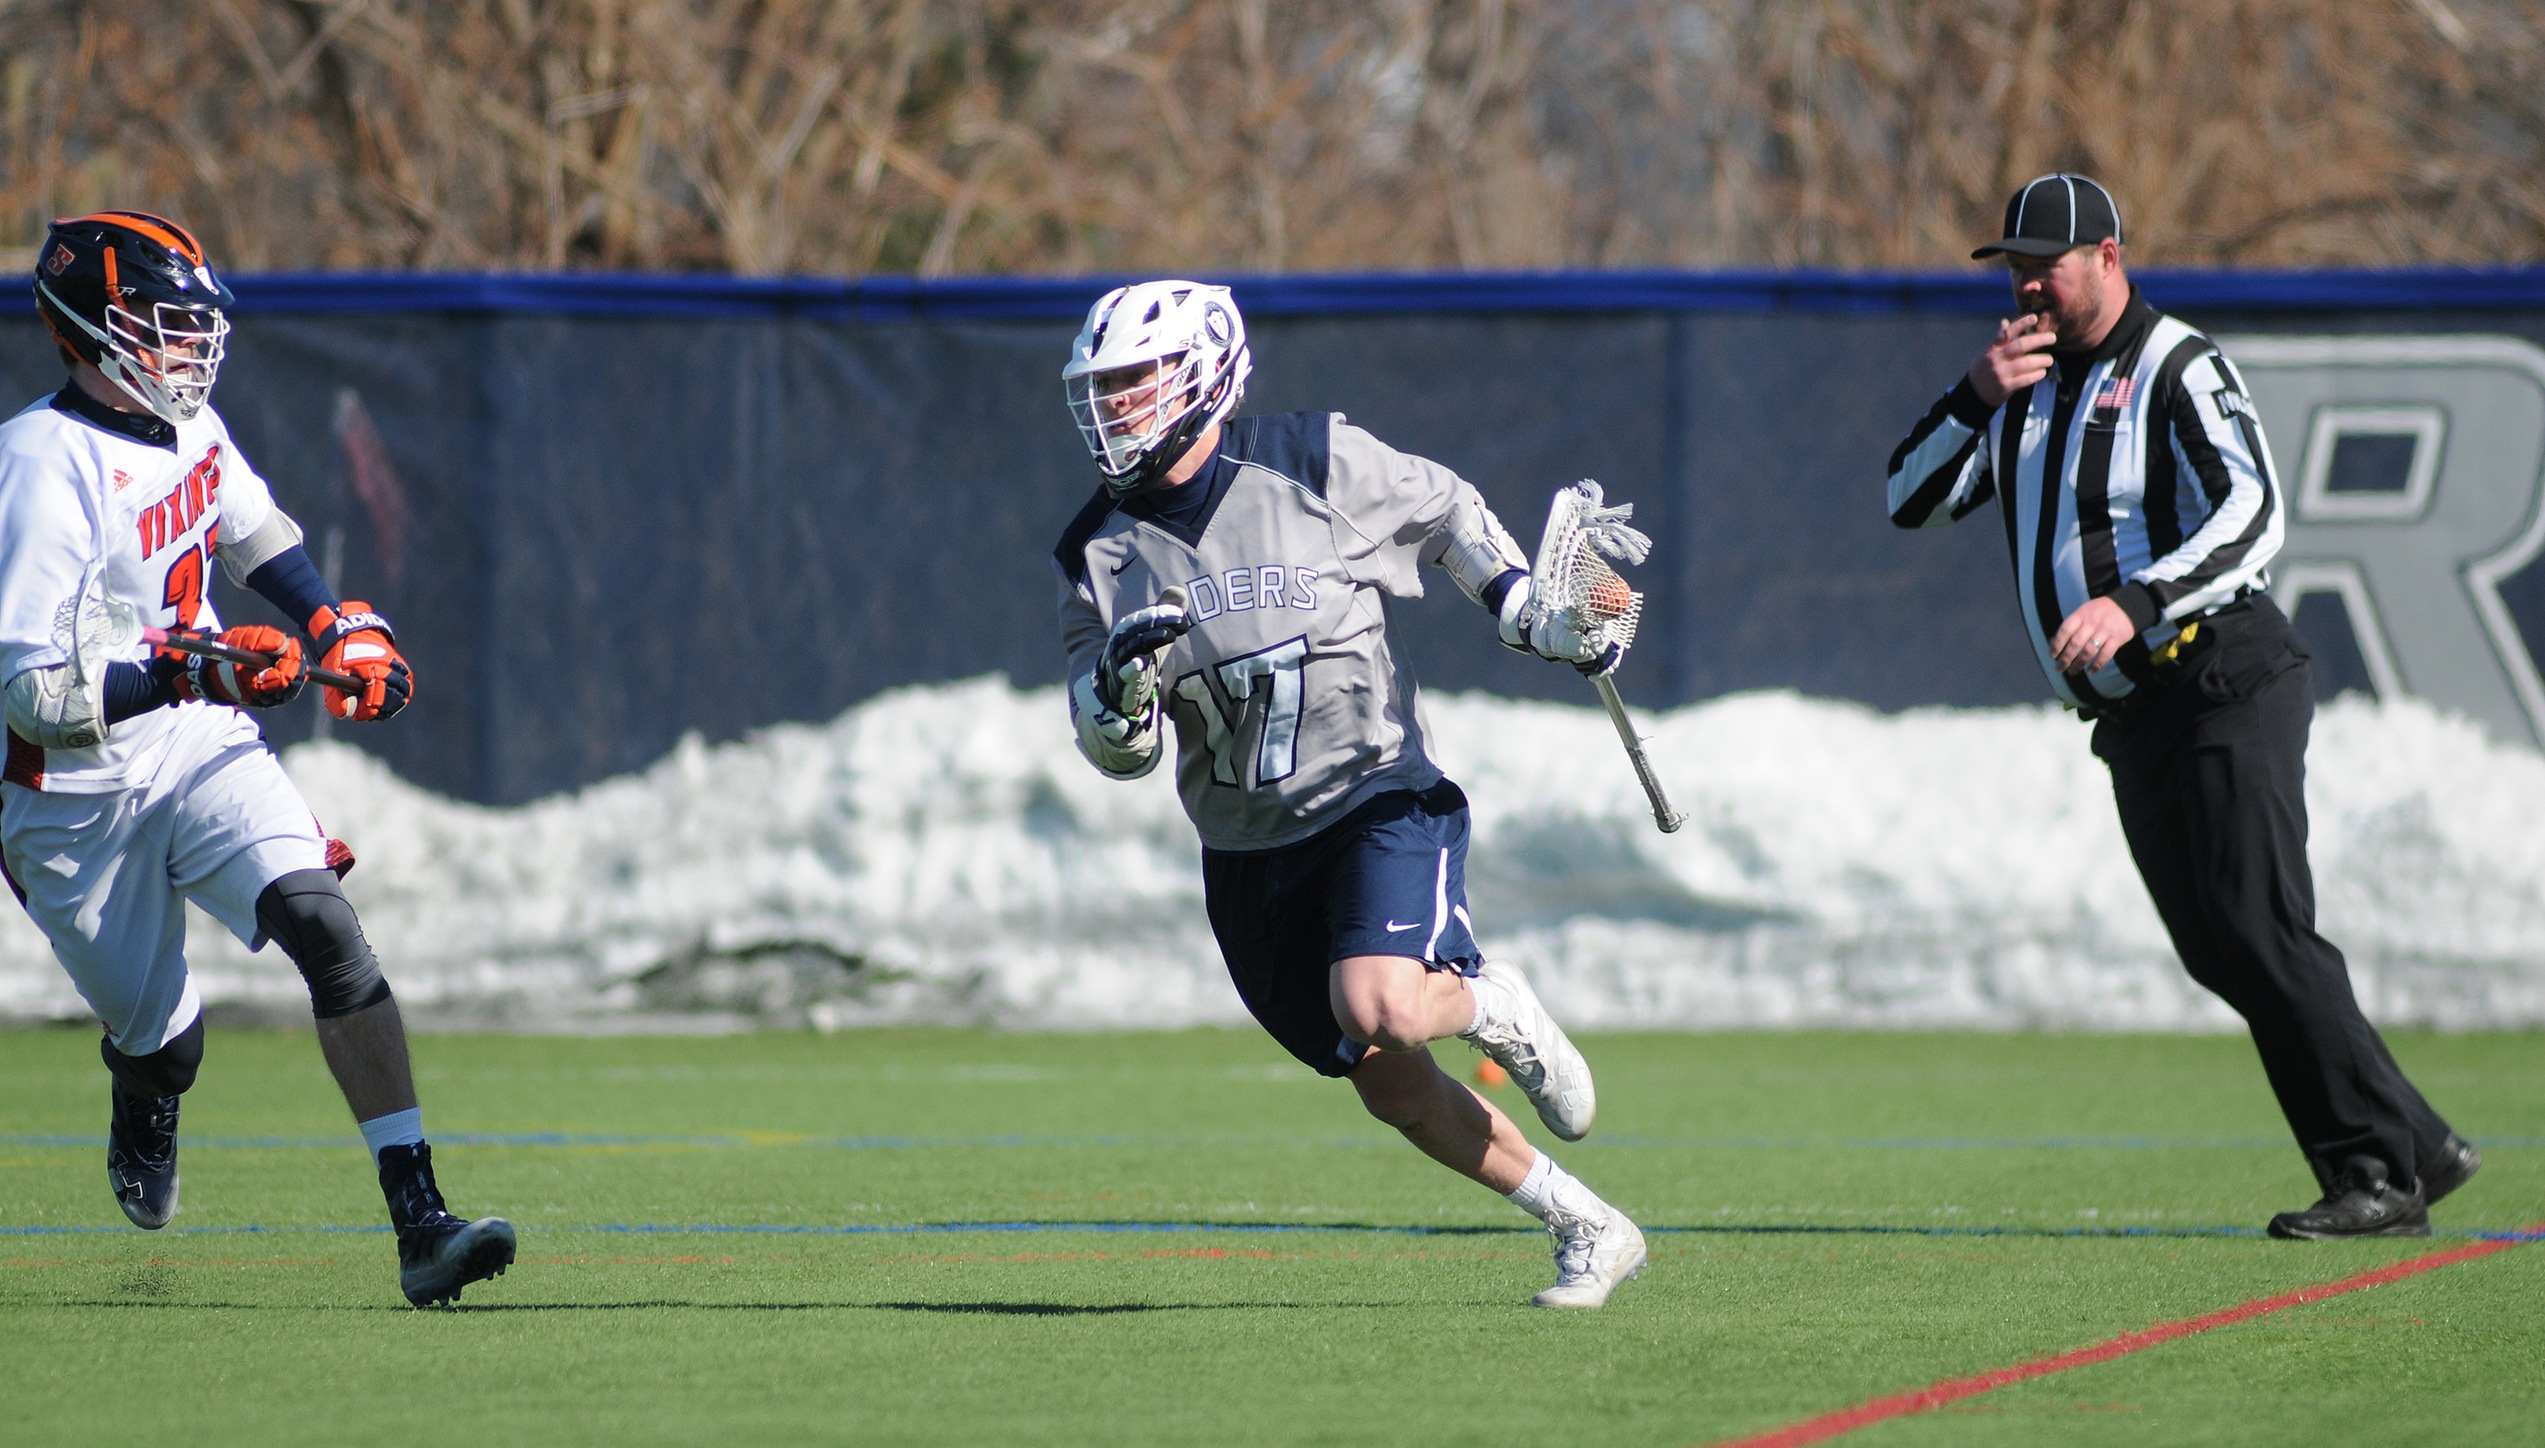 Men's Lacrosse: Raiders Earn No.3 Seed In the GNAC Playoffs after dropping the Saints, 16-10.